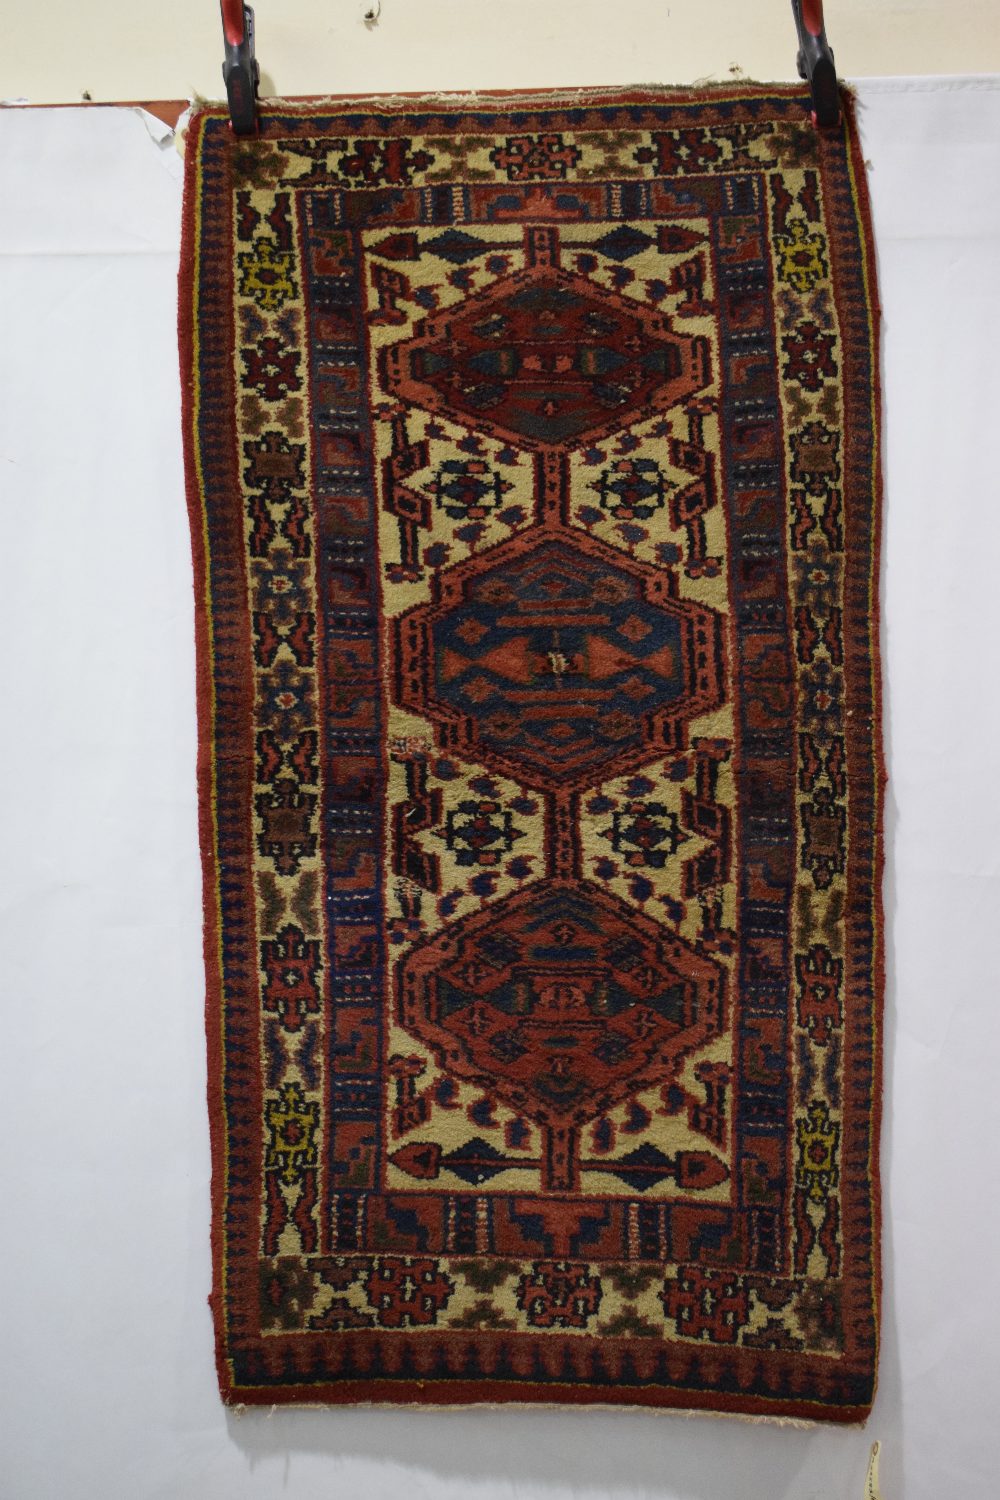 Two rugs, the first: Senneh ghileem, north west Persia, early 20th century, 6ft. 3in. X 4ft. 2in. - Image 9 of 13